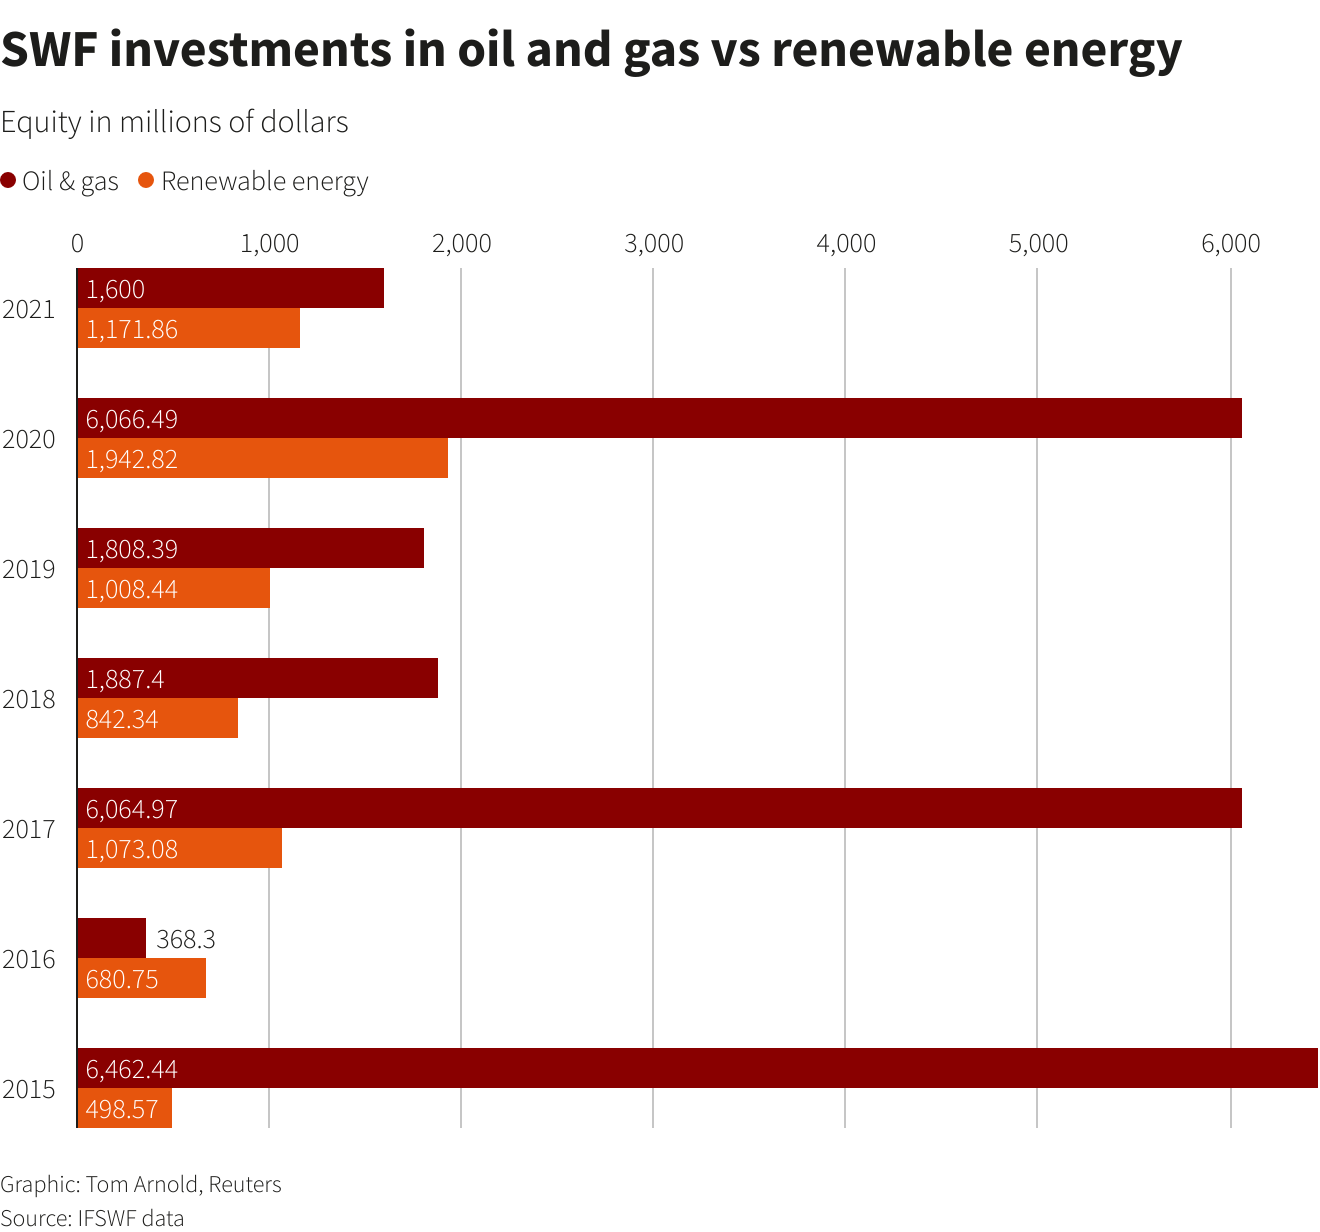 How sustainable are sovereign wealth funds?